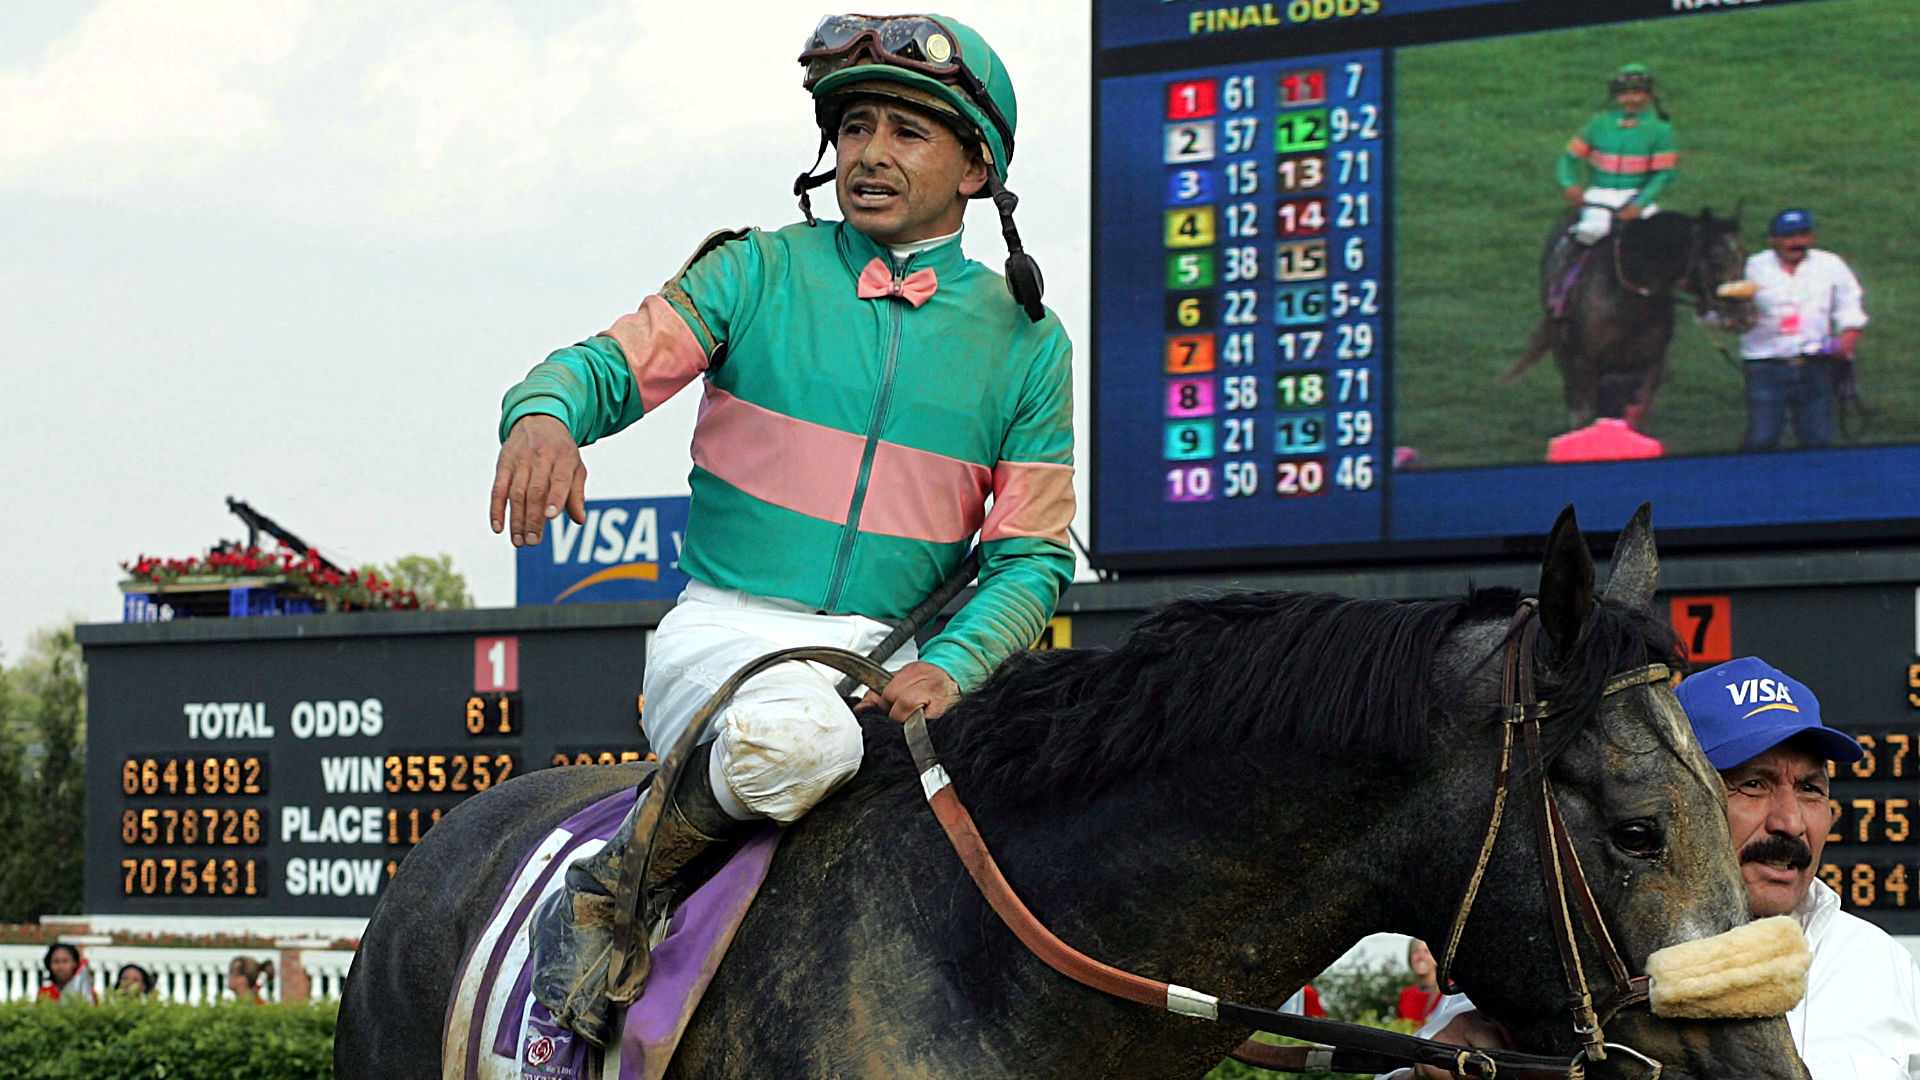 Biggest longshots to beat the odds and win the Kentucky Derby